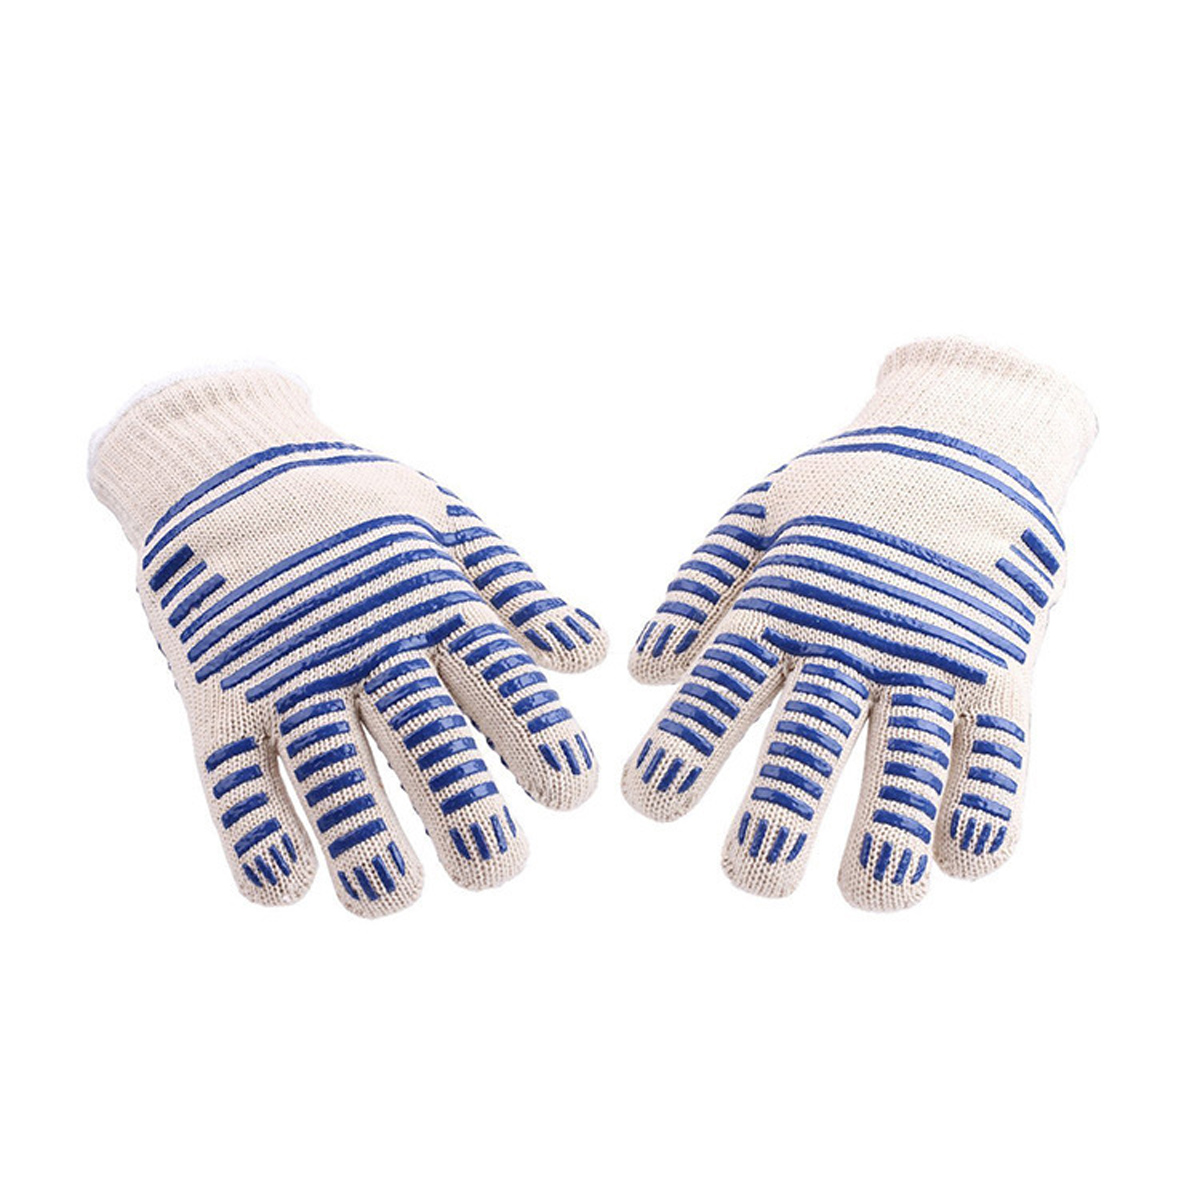 1PC-Extreme-Heat-Resistant-Kitchen-Oven-Mitts-Multi-Purpose-Barbecue-BBQ-Gloves-Anti-Cutting-Cooking-1651519-9